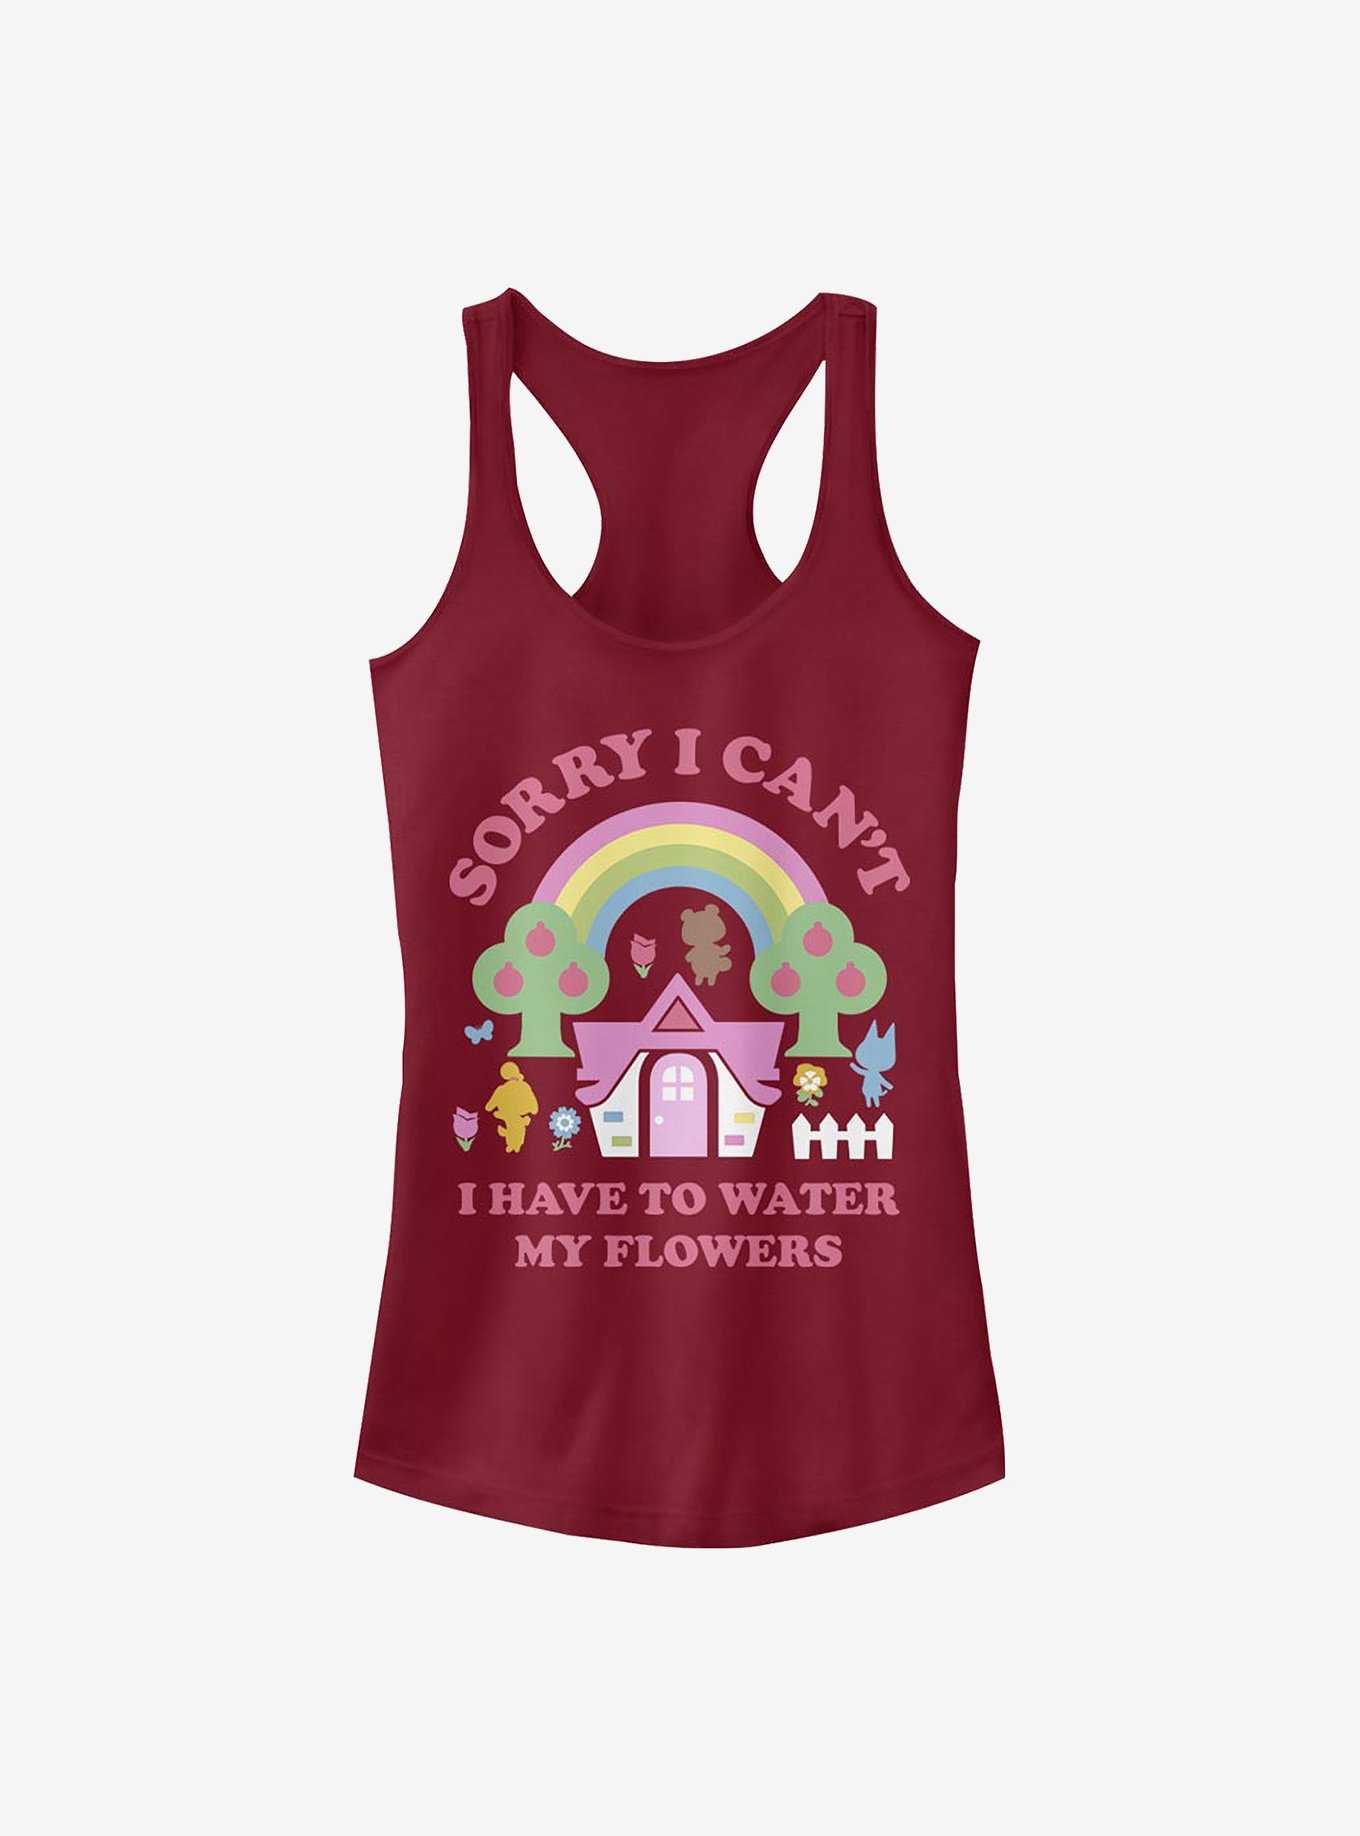 Animal Crossing Sorry I Can't Girls Tank Top, , hi-res